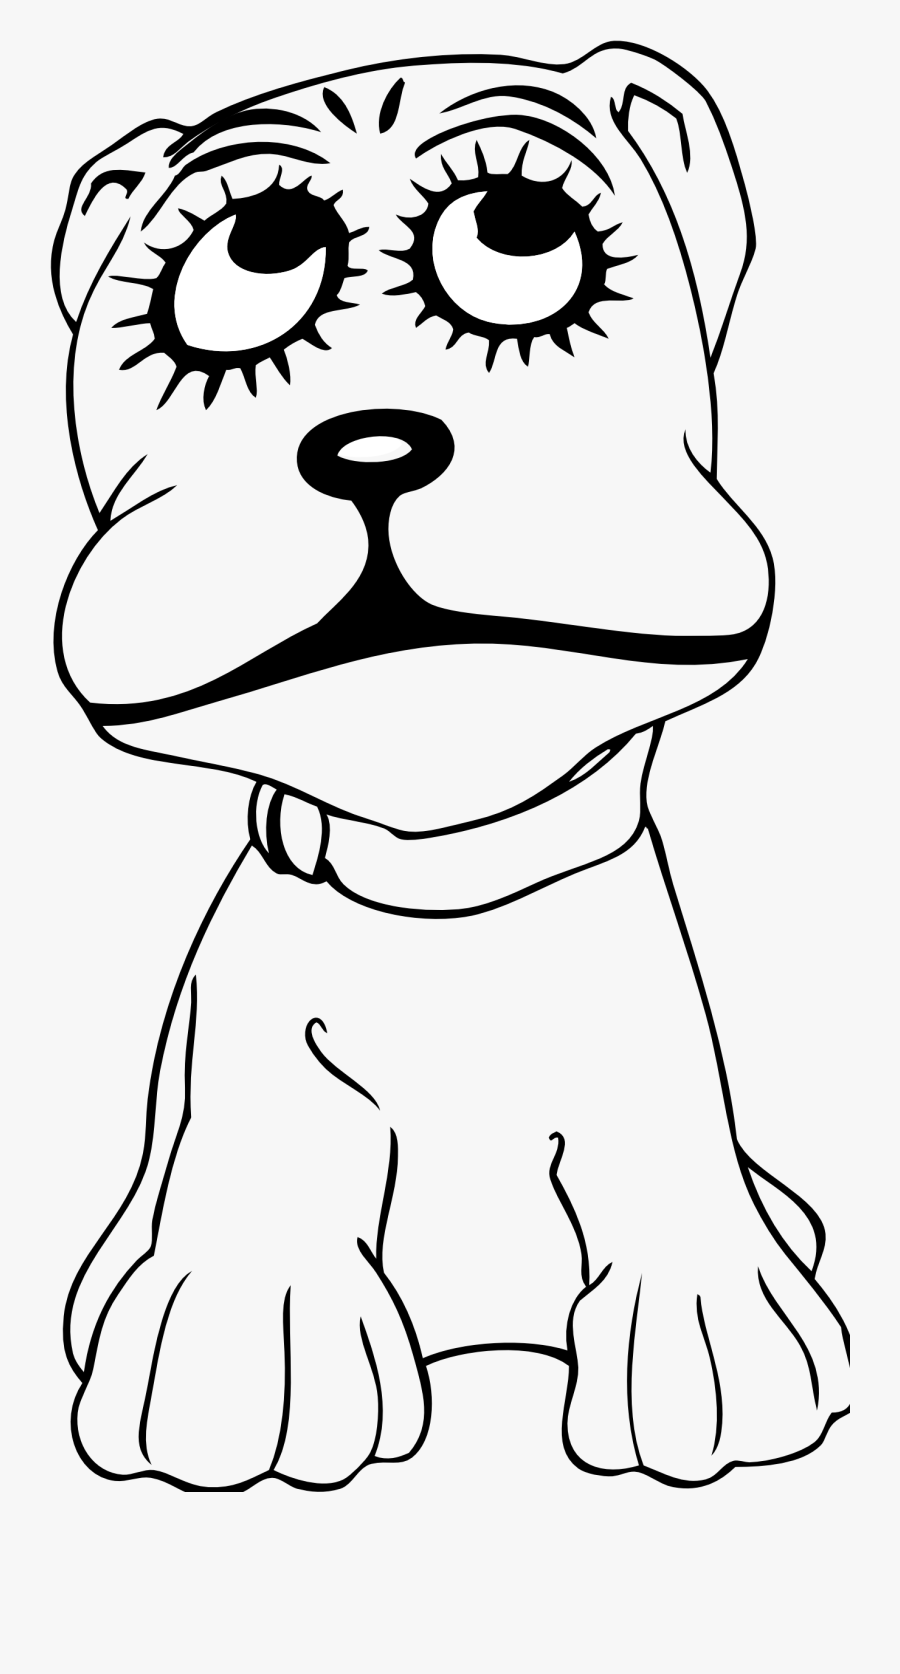 Drawings Of Cartoon Dogs - 2 Dogs Clip Art, Transparent Clipart